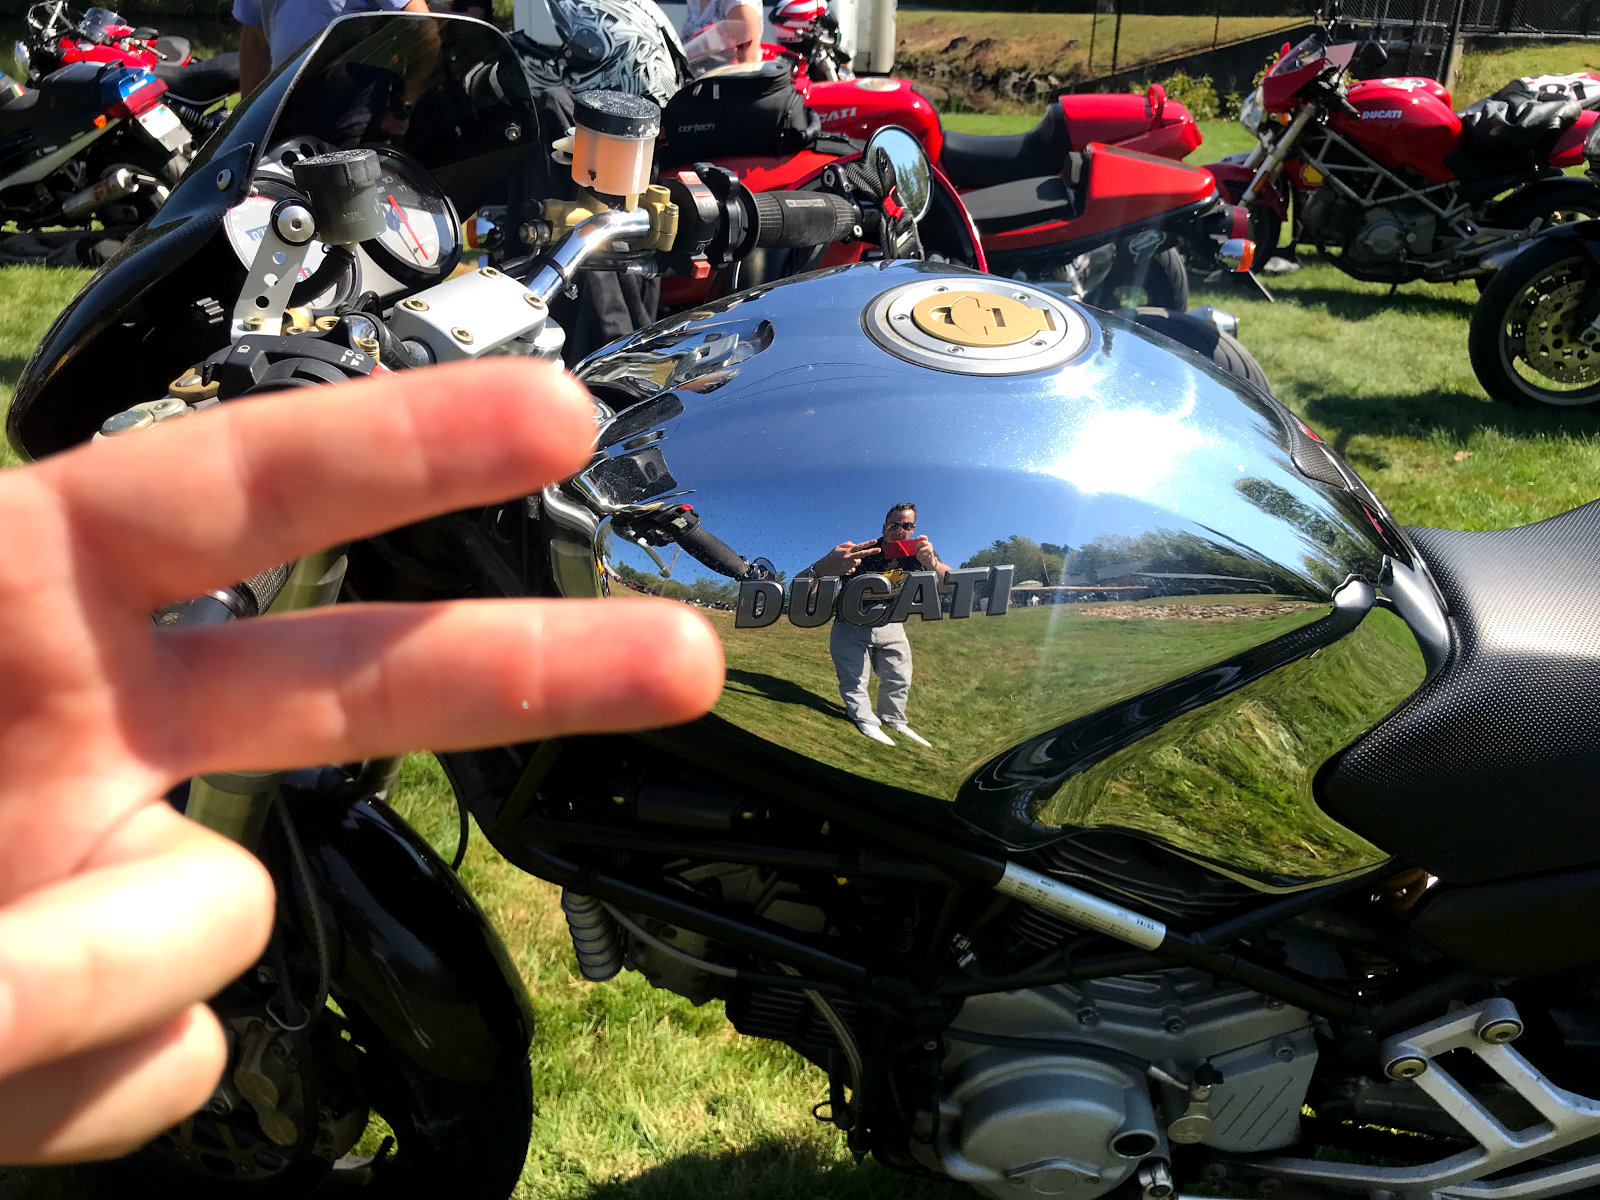 Tigh Loughhead and a Ducati Monster at IMOC 2017 Italian Motorcycle Owners Club Rally